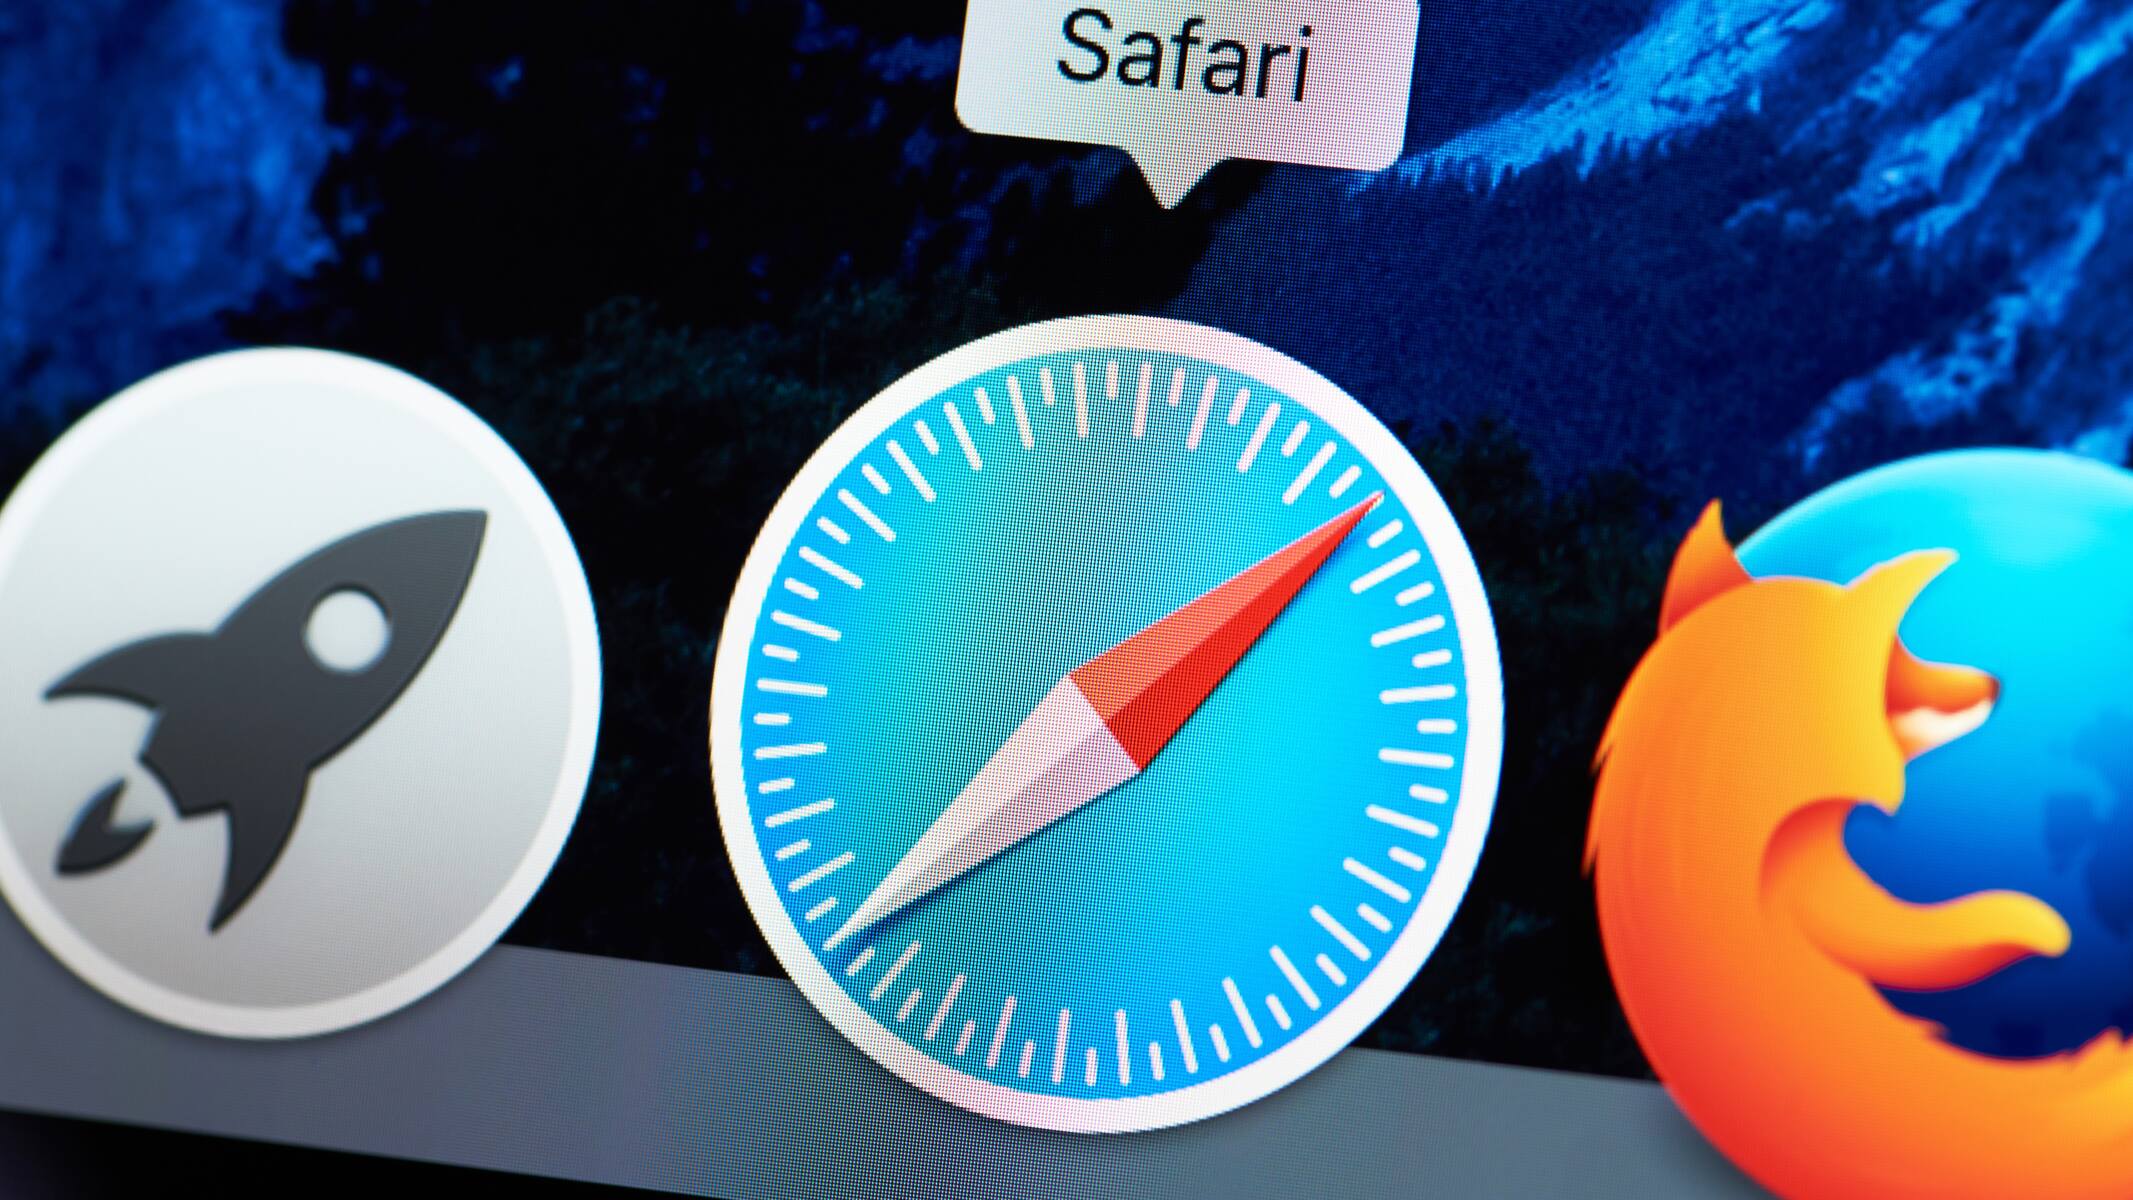 Where To Find Extensions In Safari